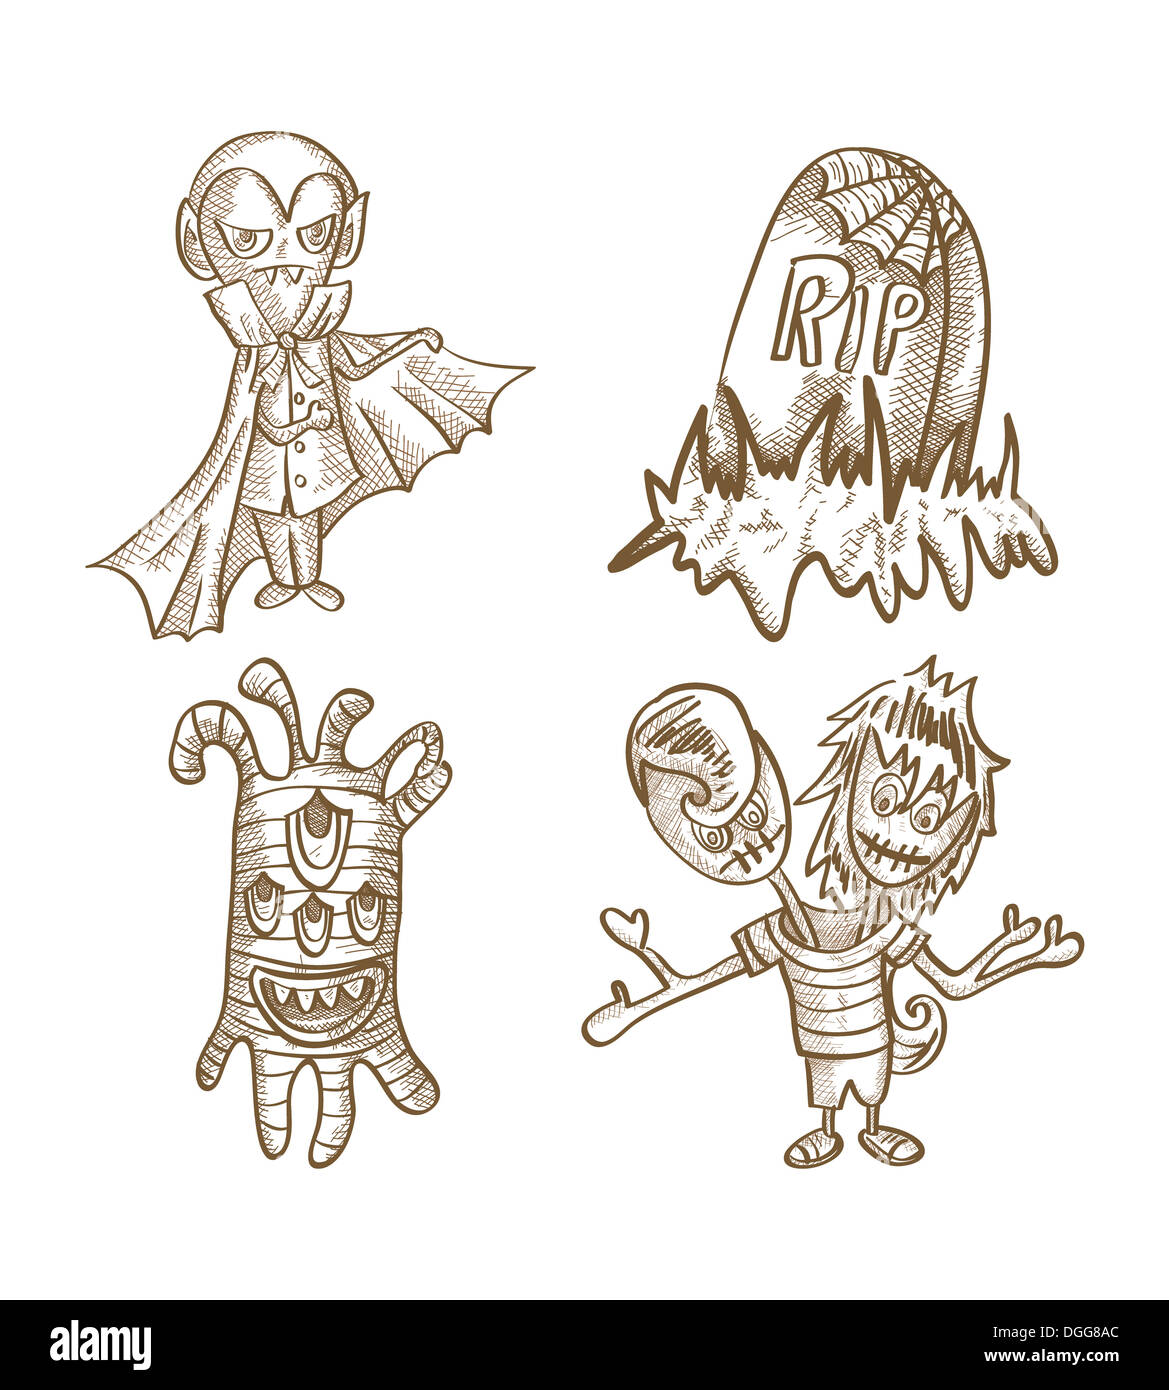 Halloween Monsters isolated spooky hand drawn classic creatures set. EPS10 vector file organized in layers for easy editing. Stock Photo